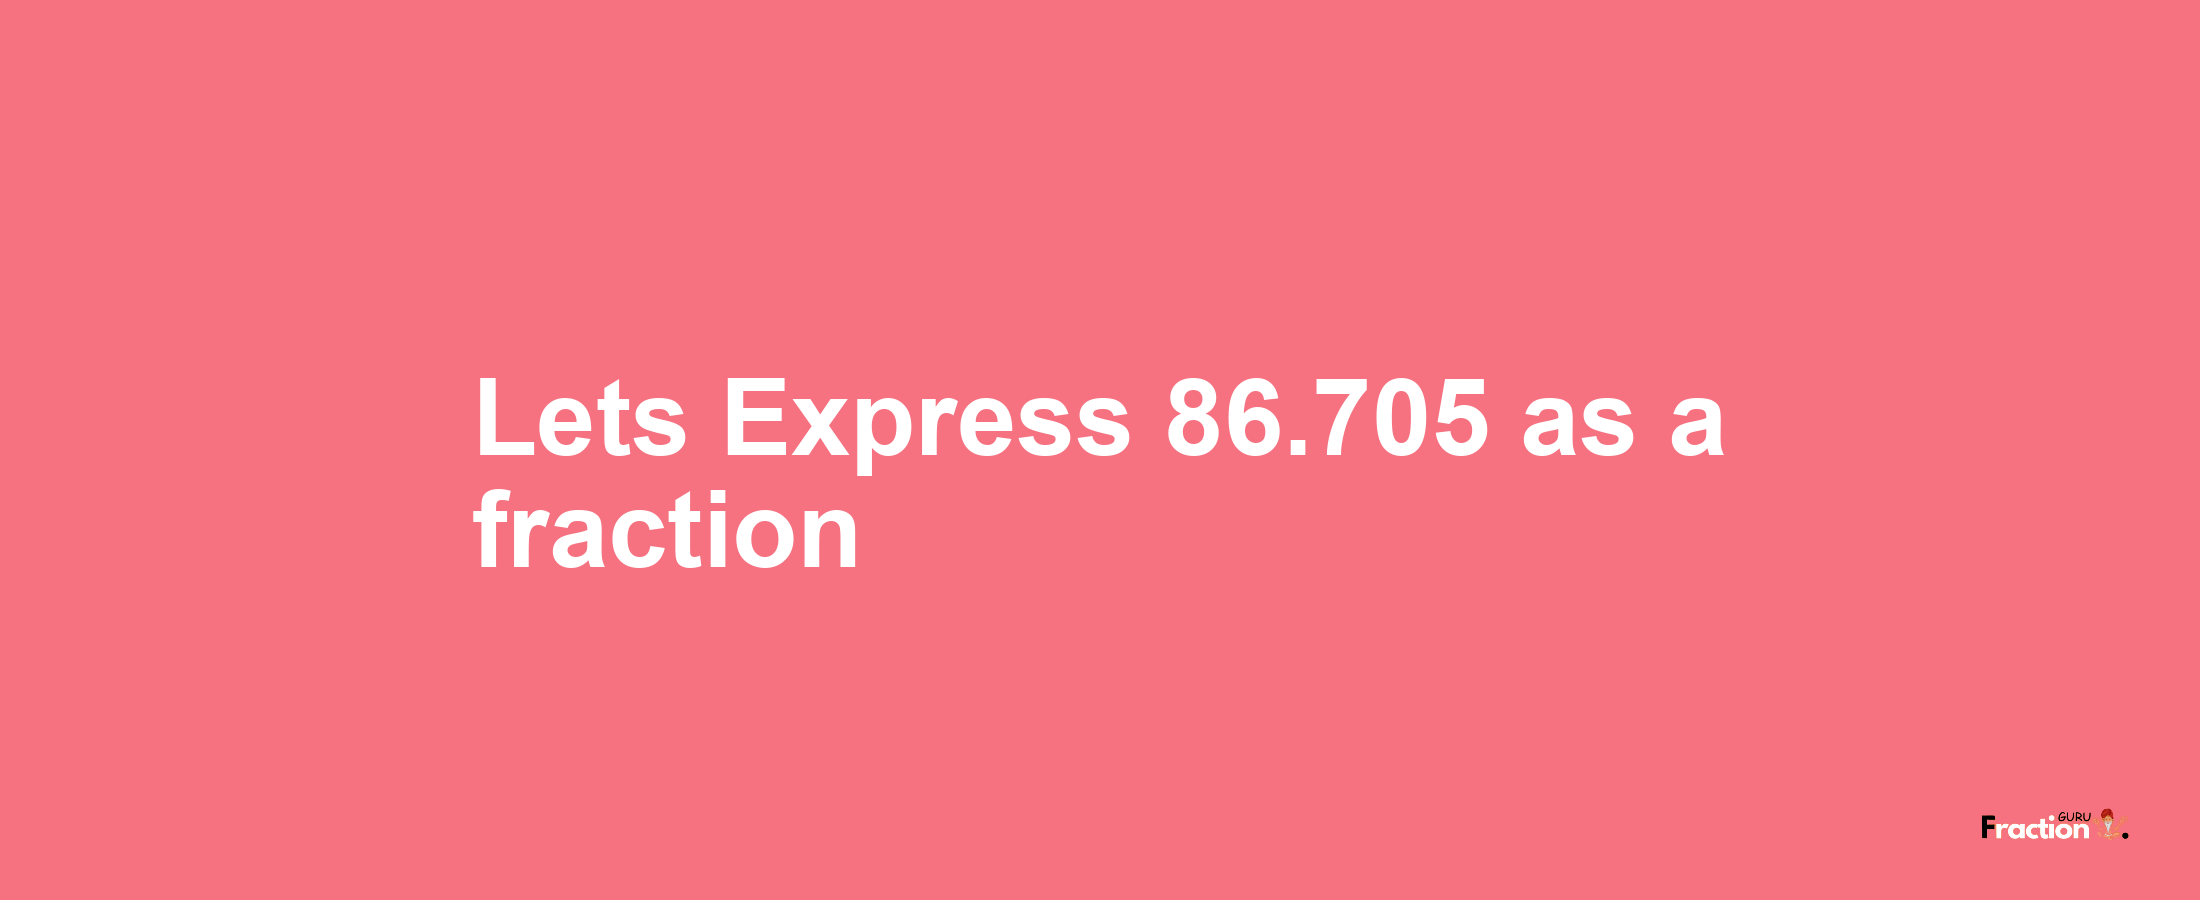 Lets Express 86.705 as afraction